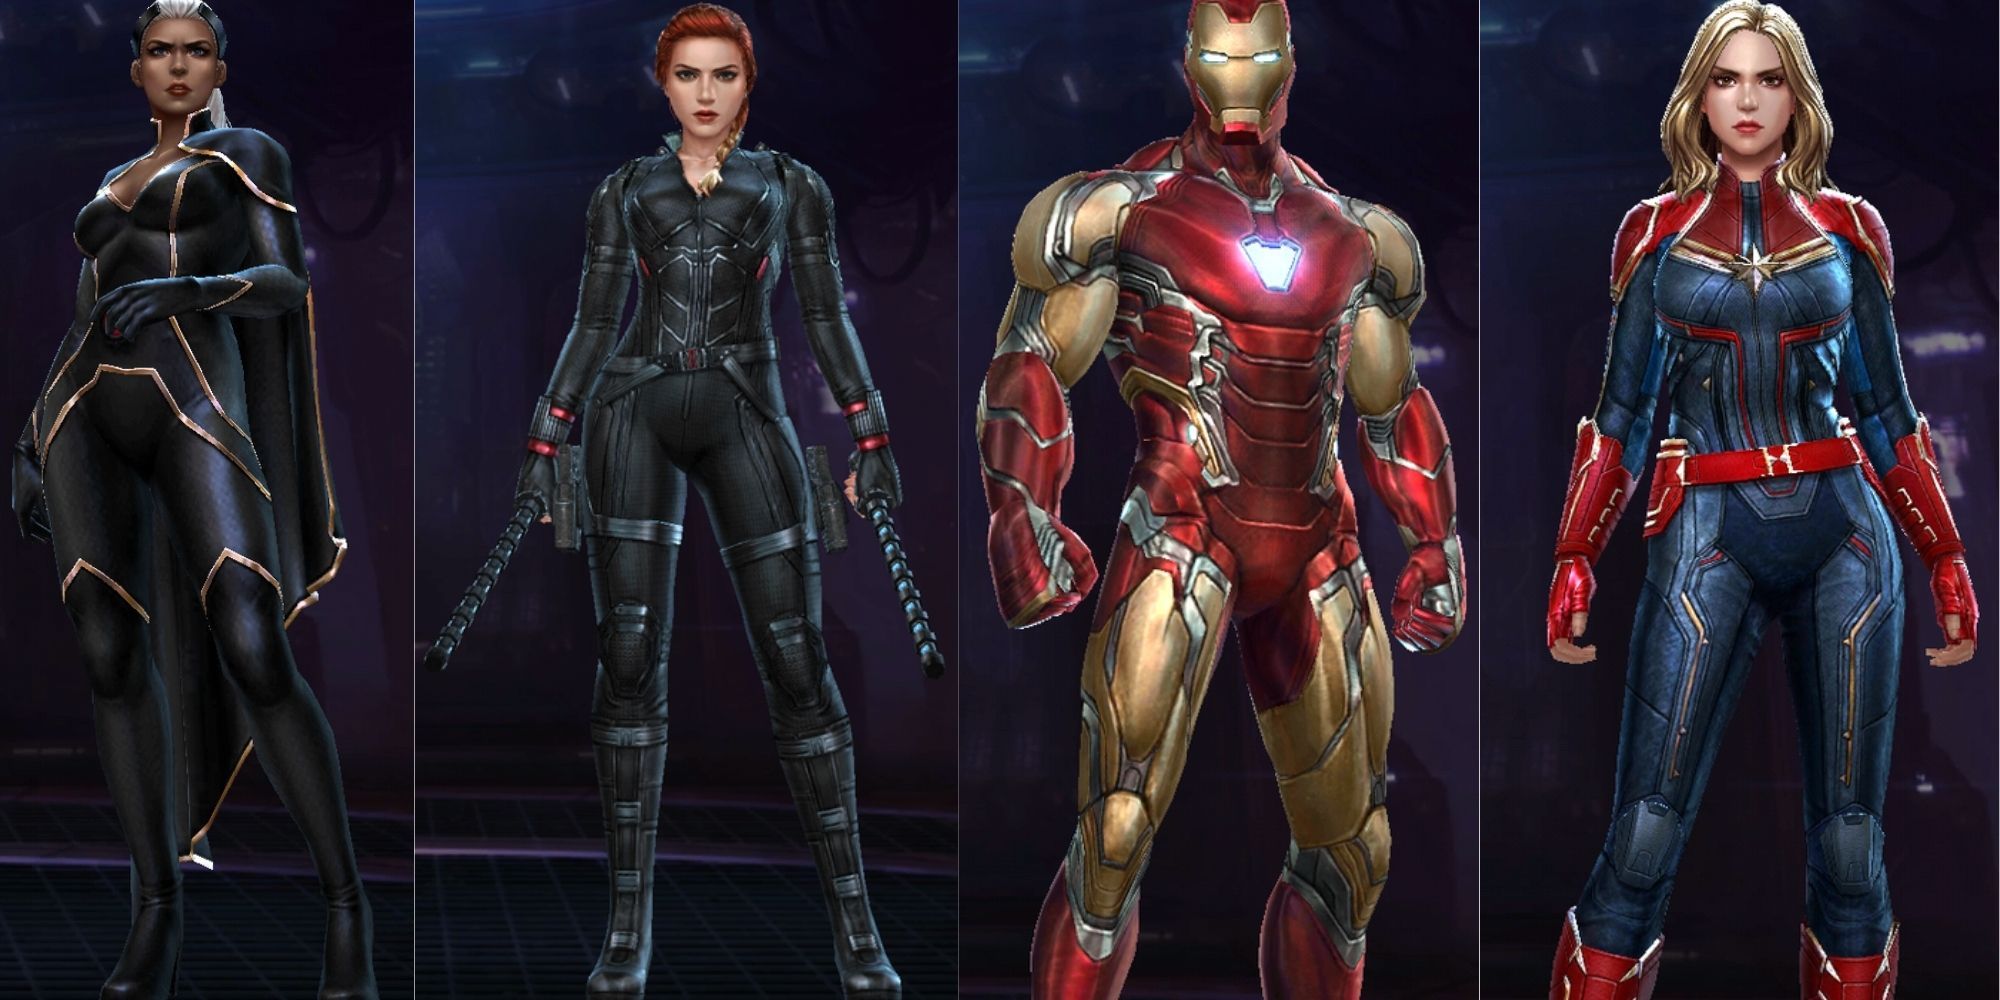 Split image of Storm, Black Widow, Iron Man, and Captain Marvel's character models from Marvel Future Revolution.